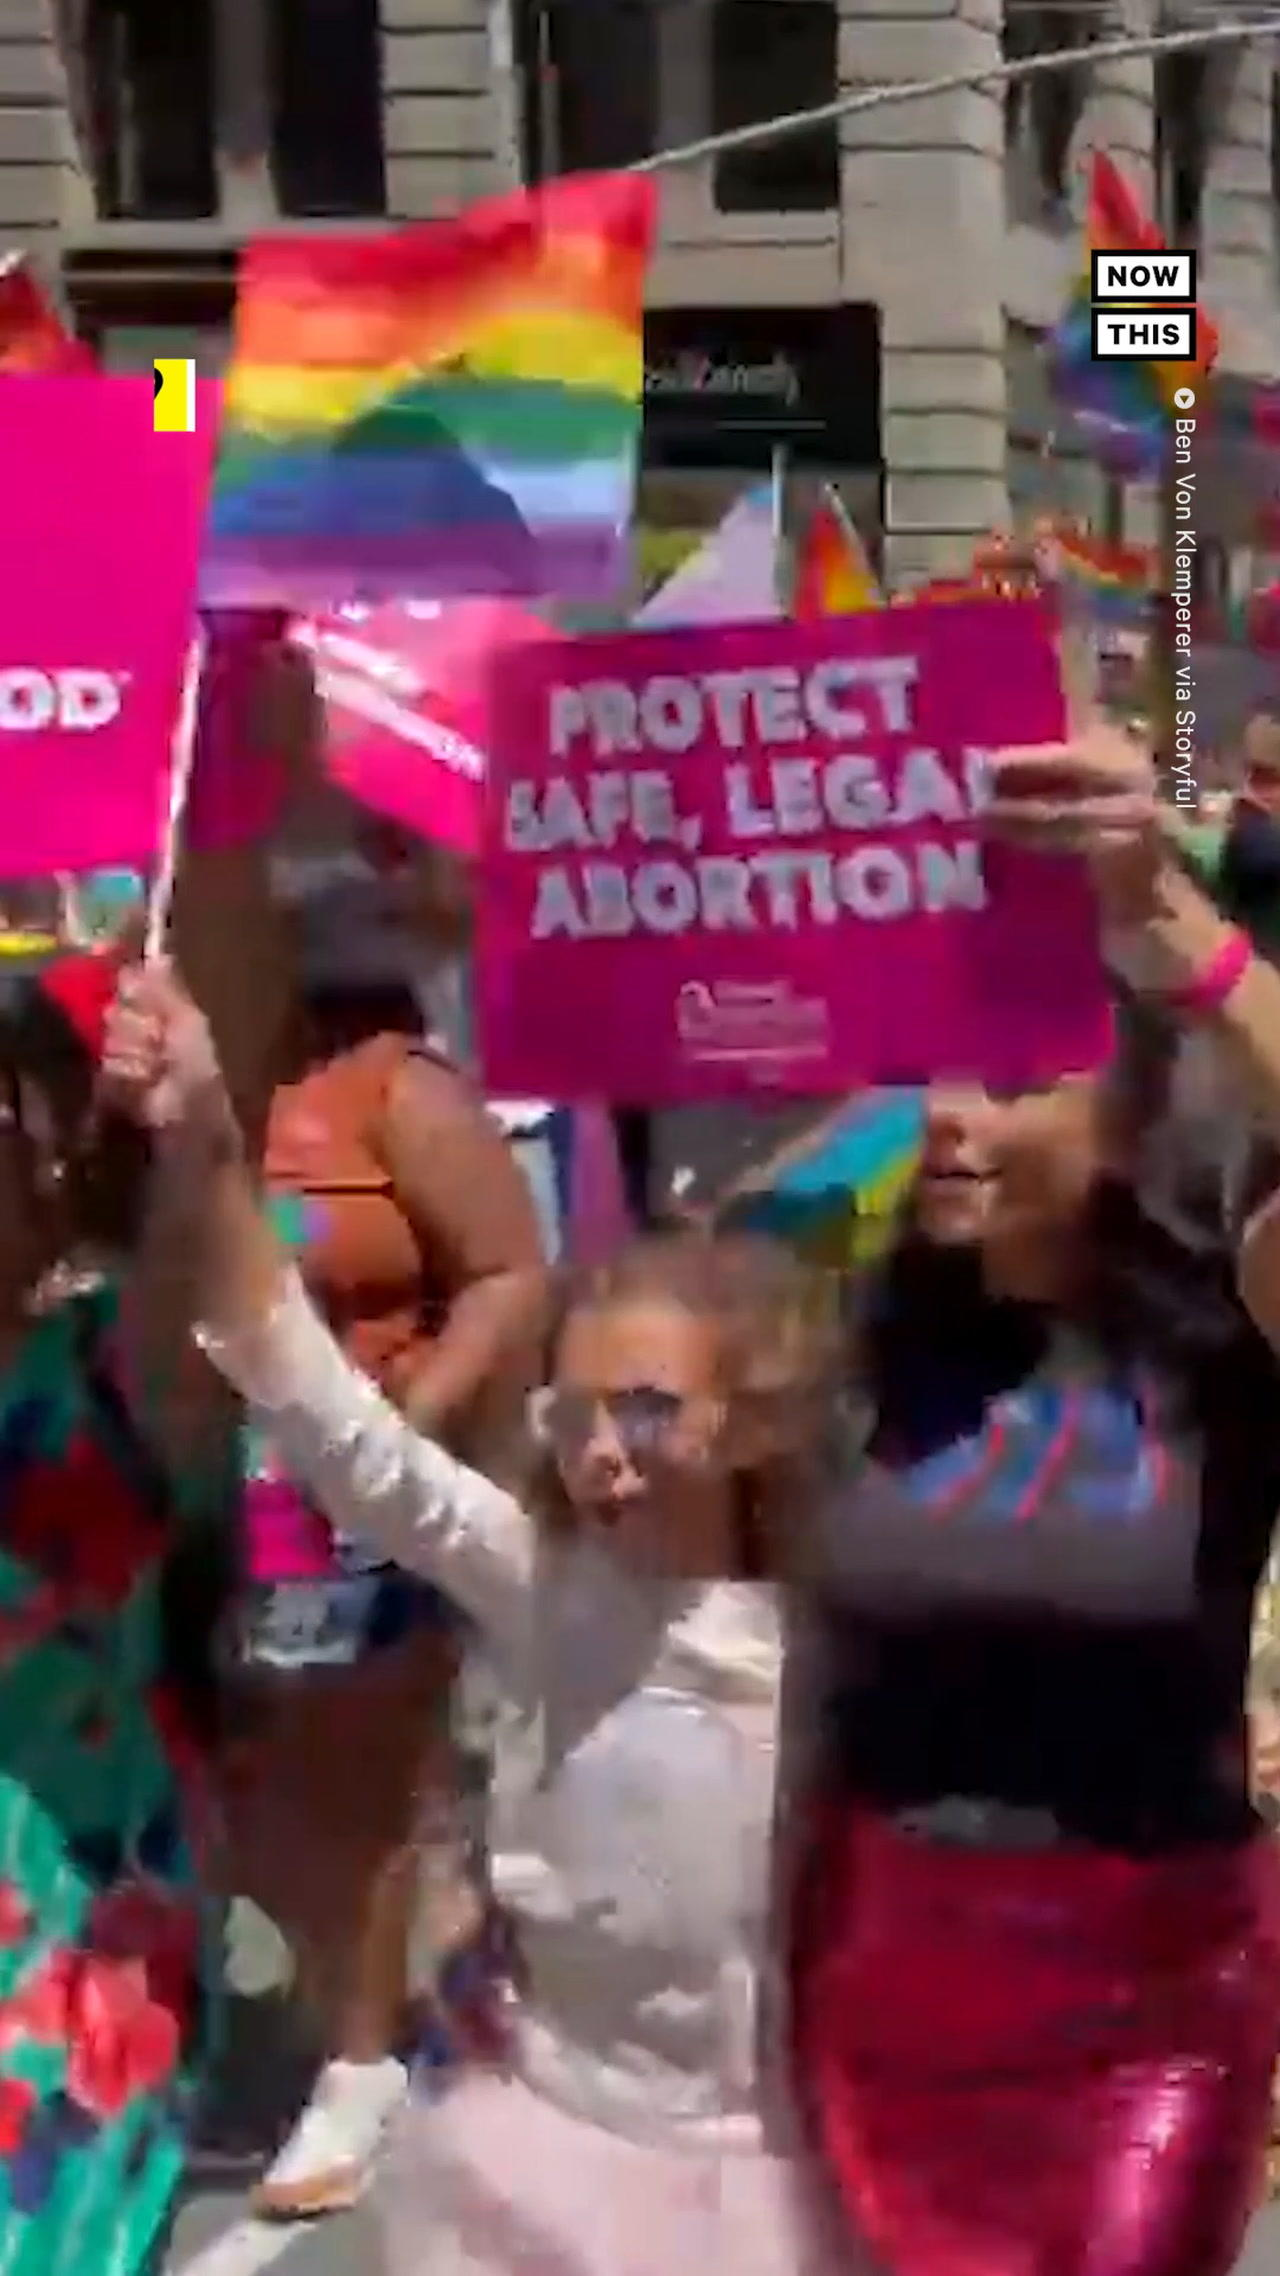 Planned Parenthood Leads NYC's Pride March